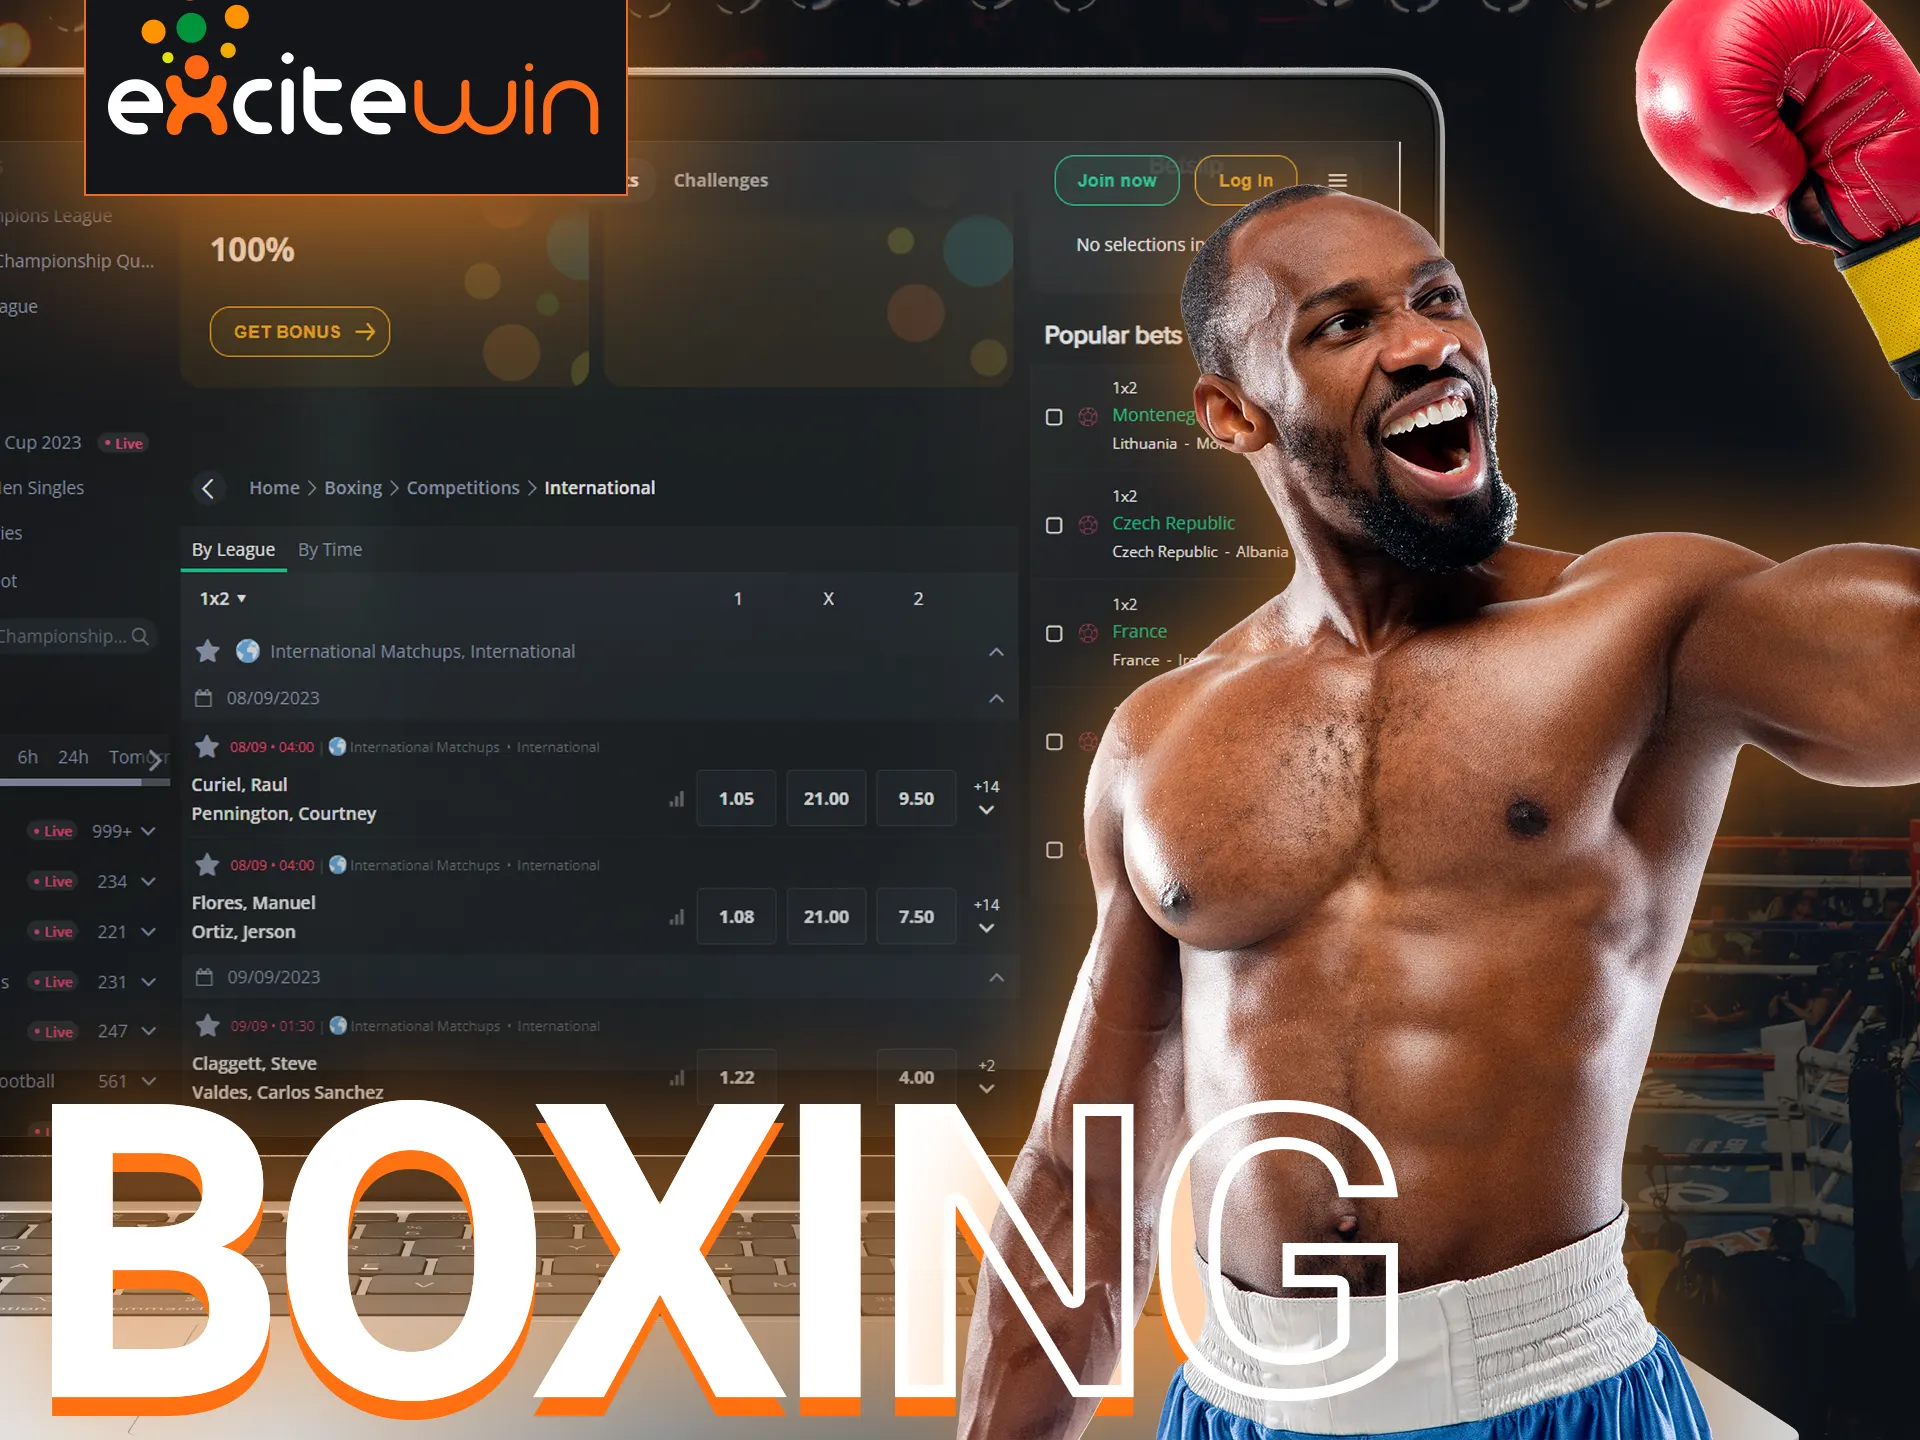 Bet on boxing with Excitewin.